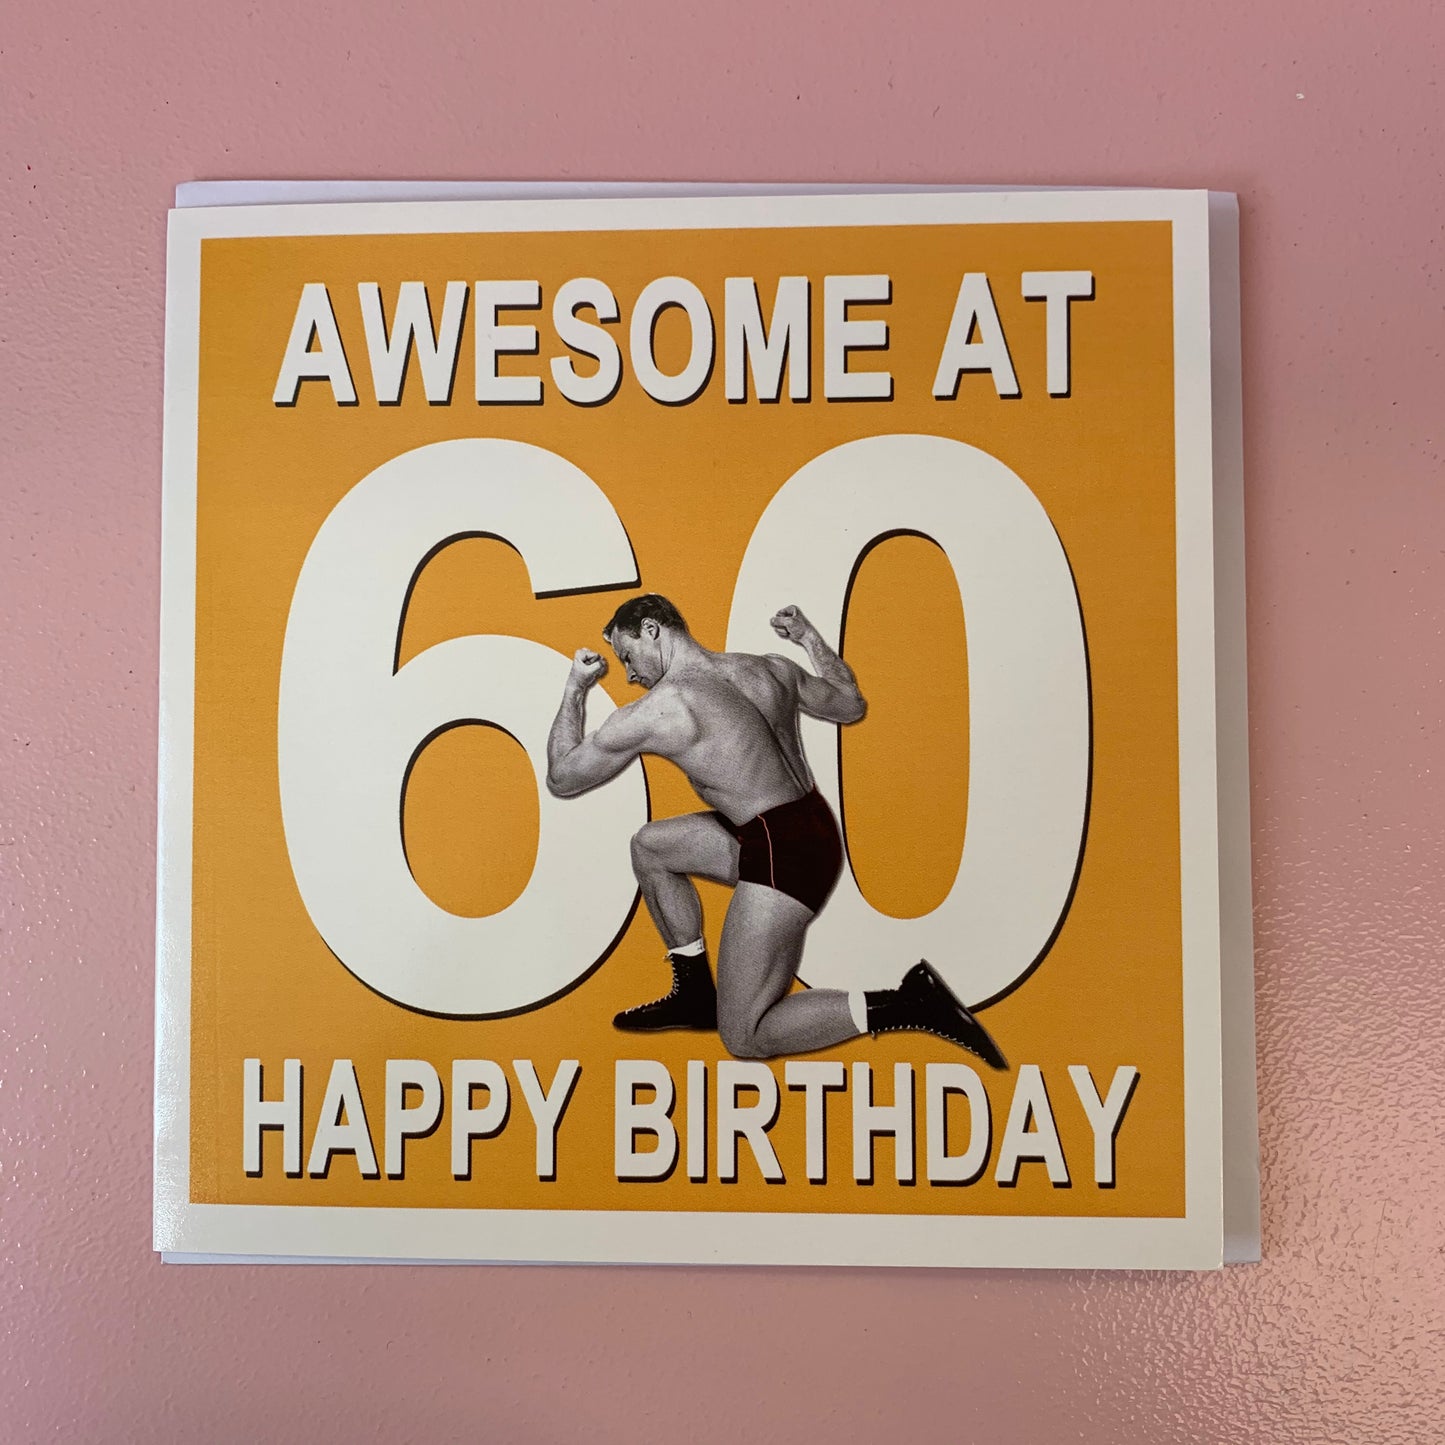 Awesome At 60 Birthday Card